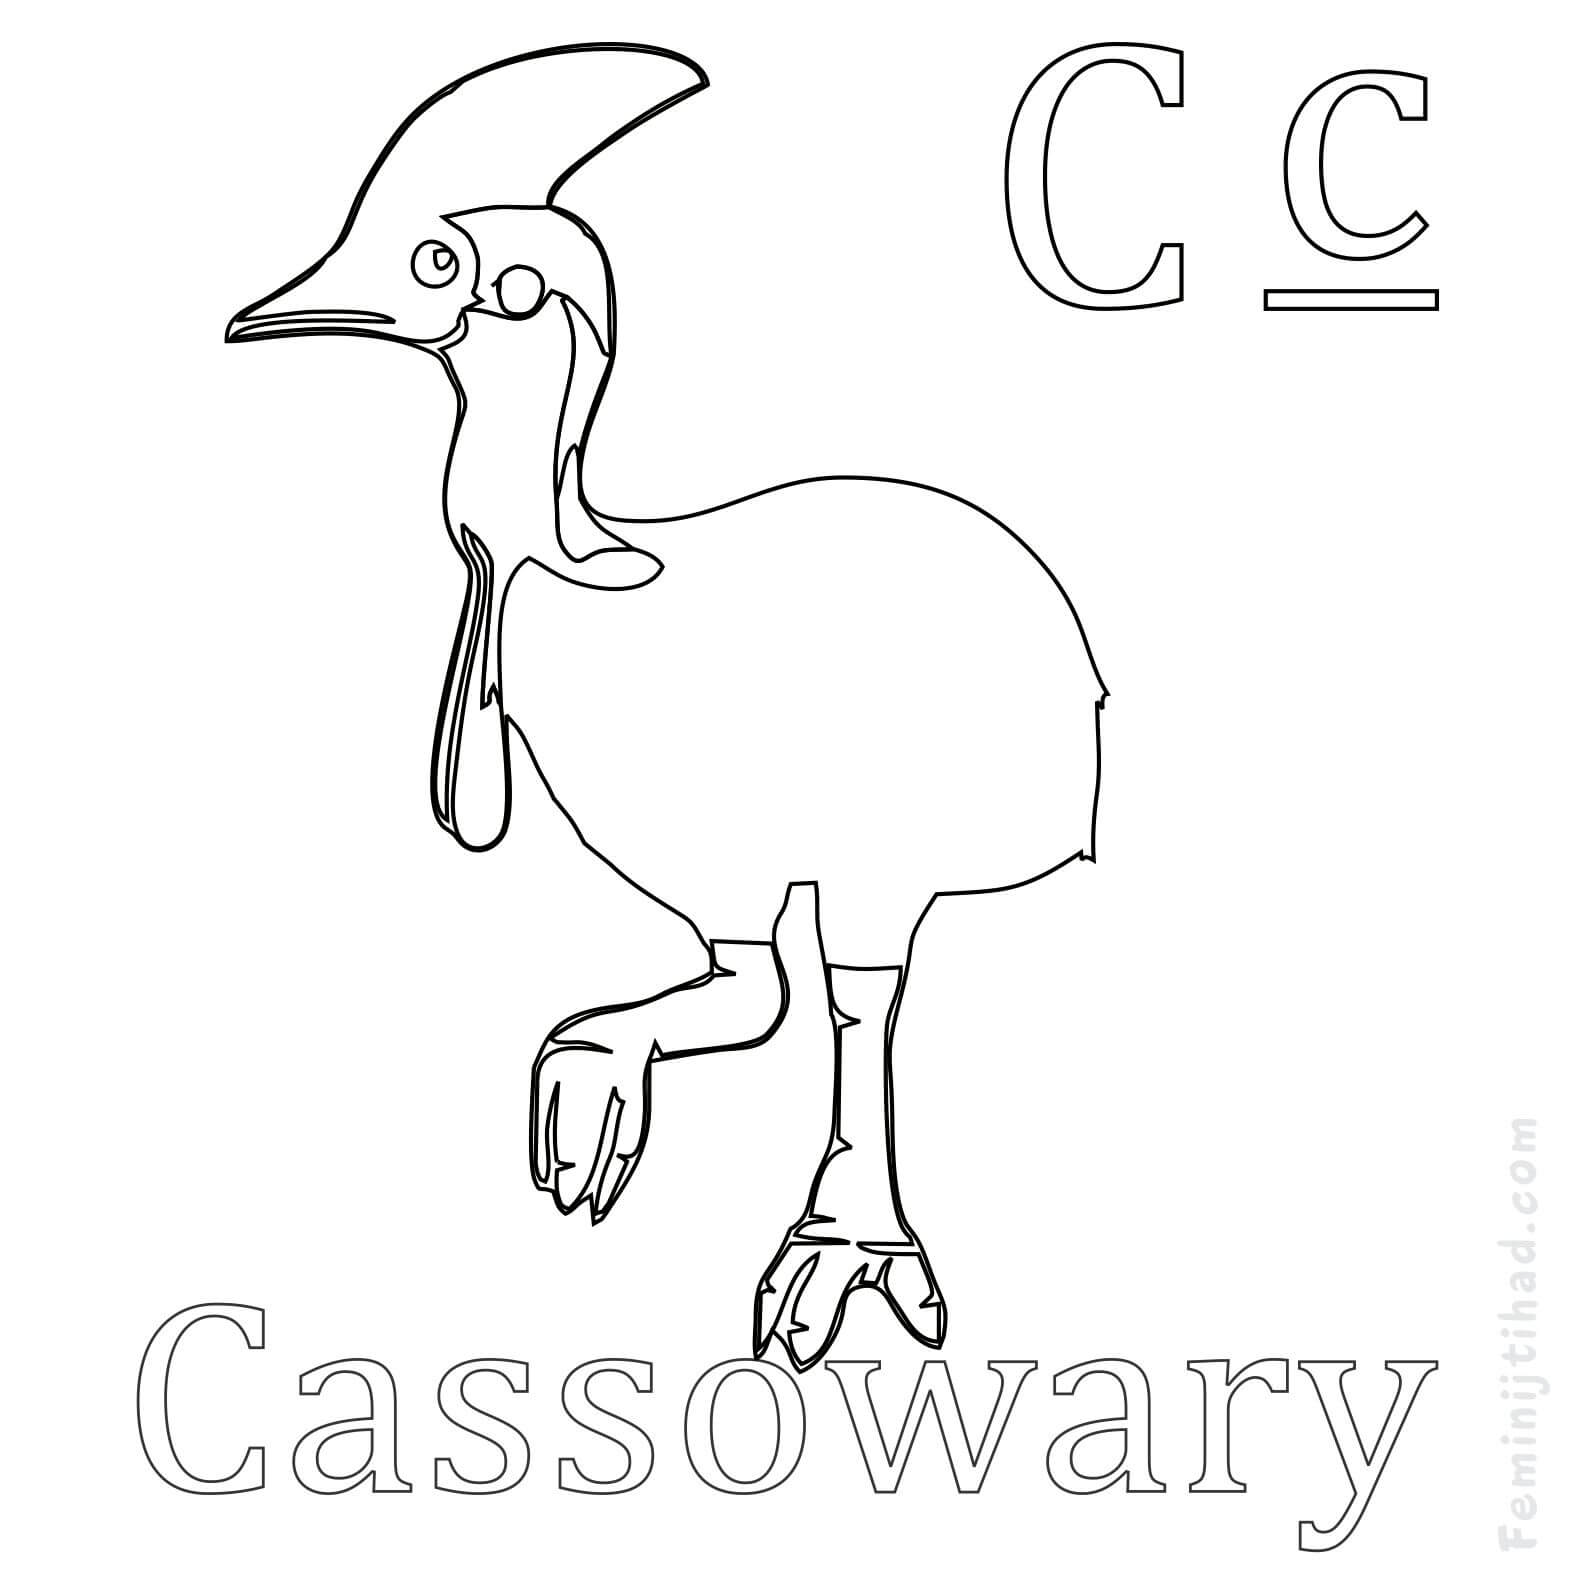 Cassowary Coloring Page Easy